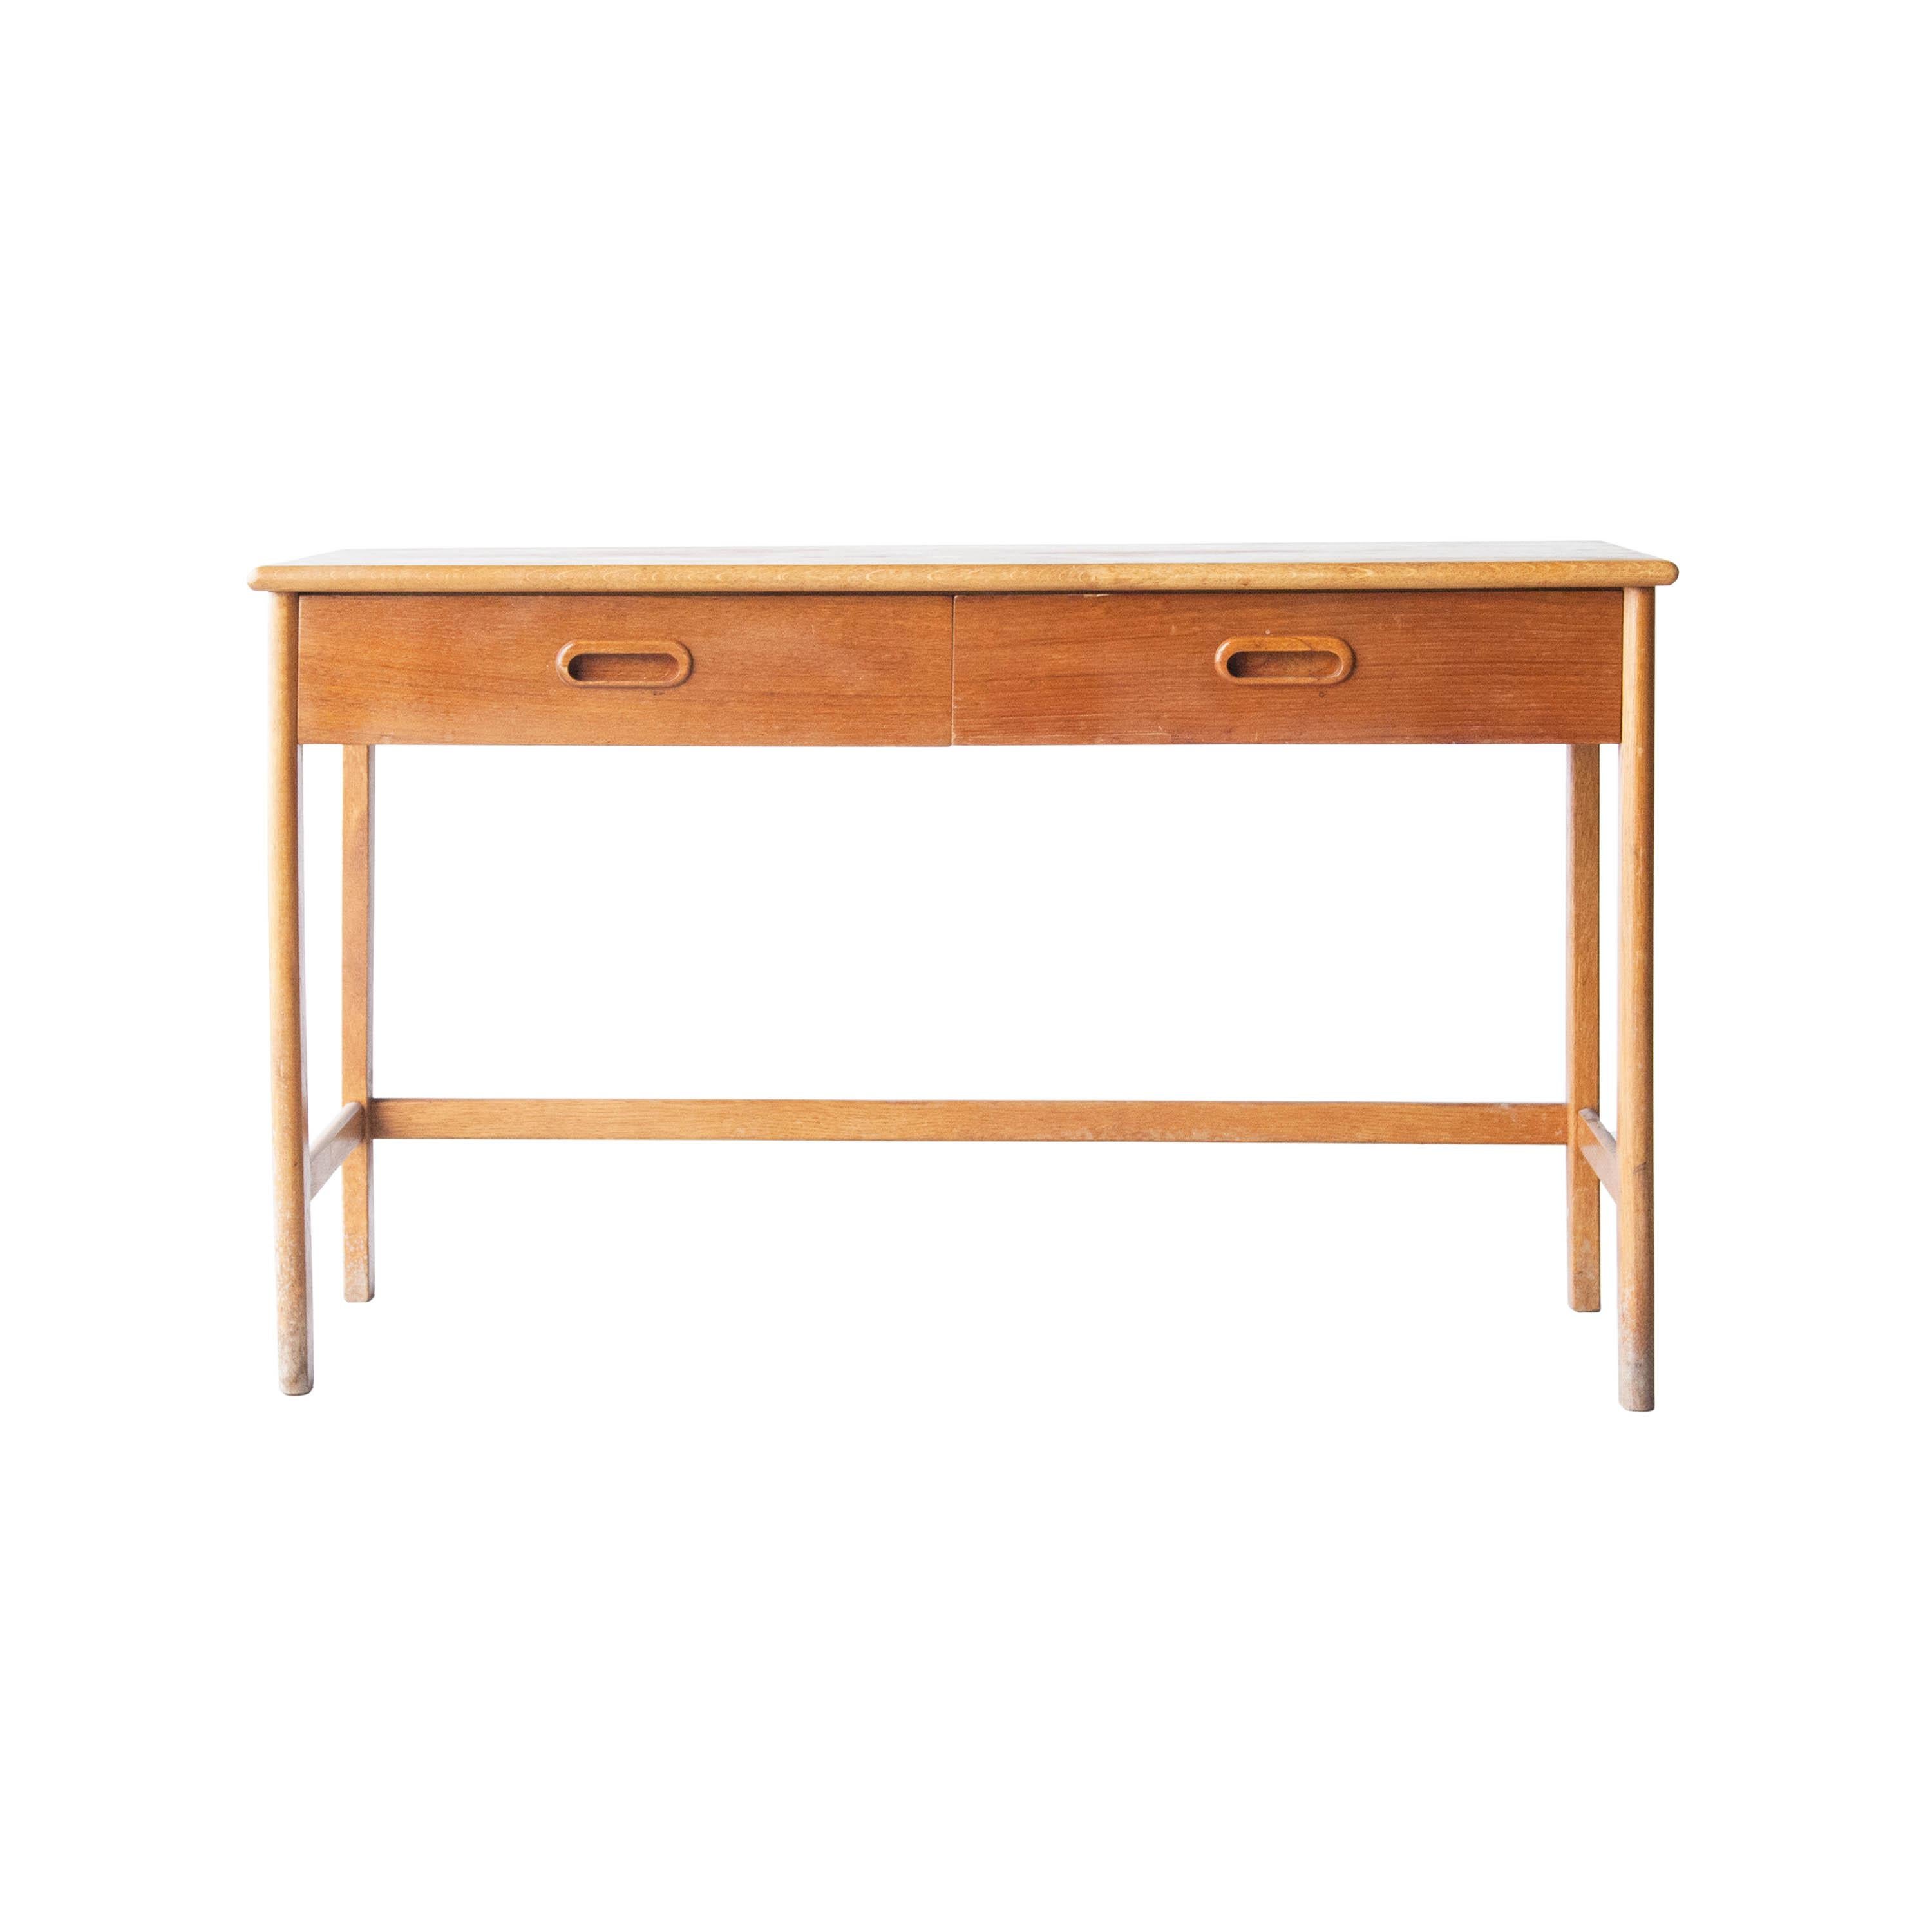 Sideboard with teak structure, with two drawers and carved handles.